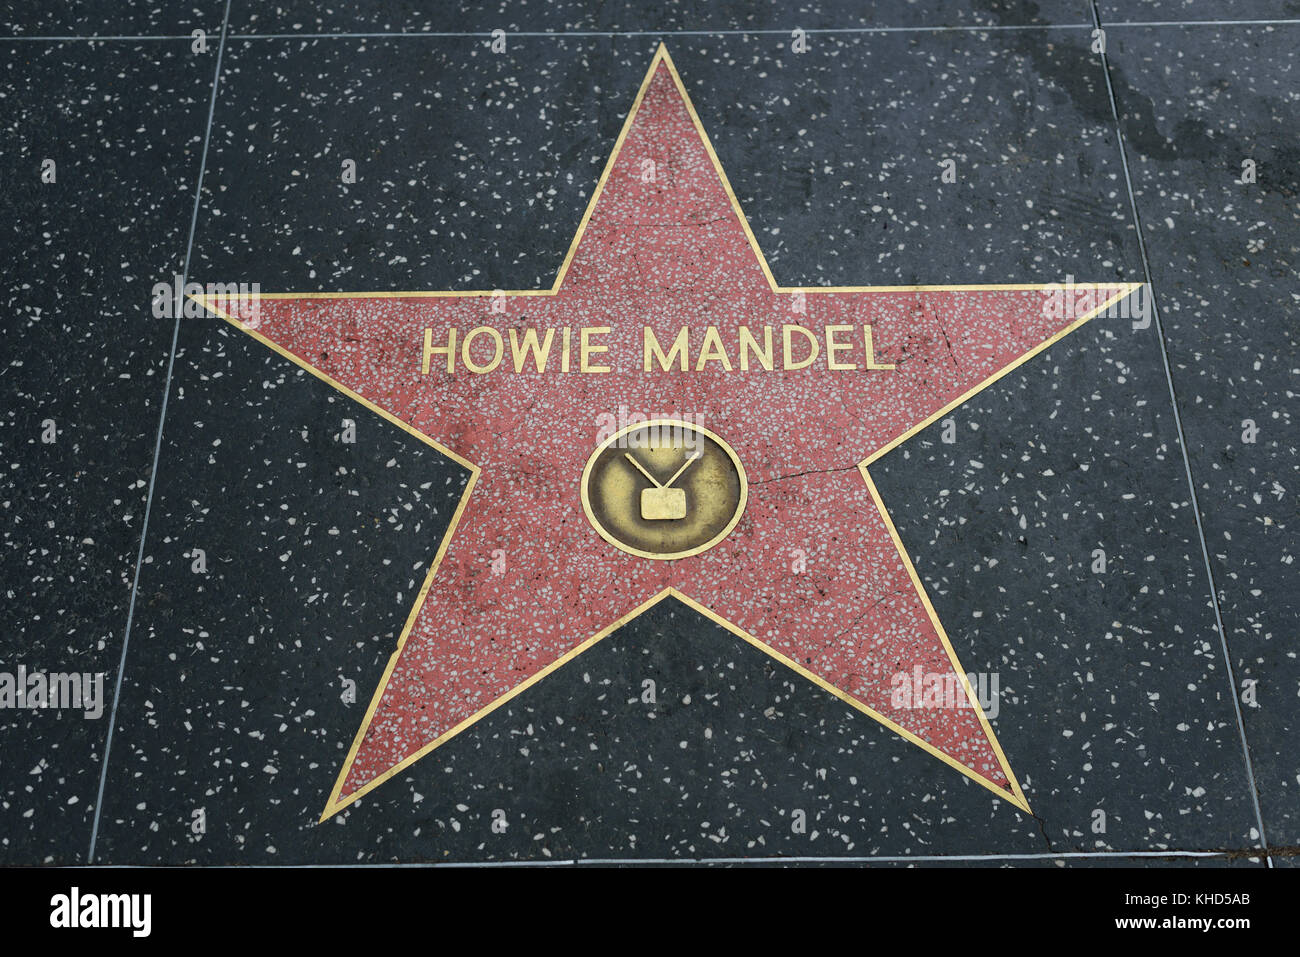 HOLLYWOOD, CA - DECEMBER 06: Howie Mandel star on the Hollywood Walk of Fame in Hollywood, California on Dec. 6, 2016. Stock Photo